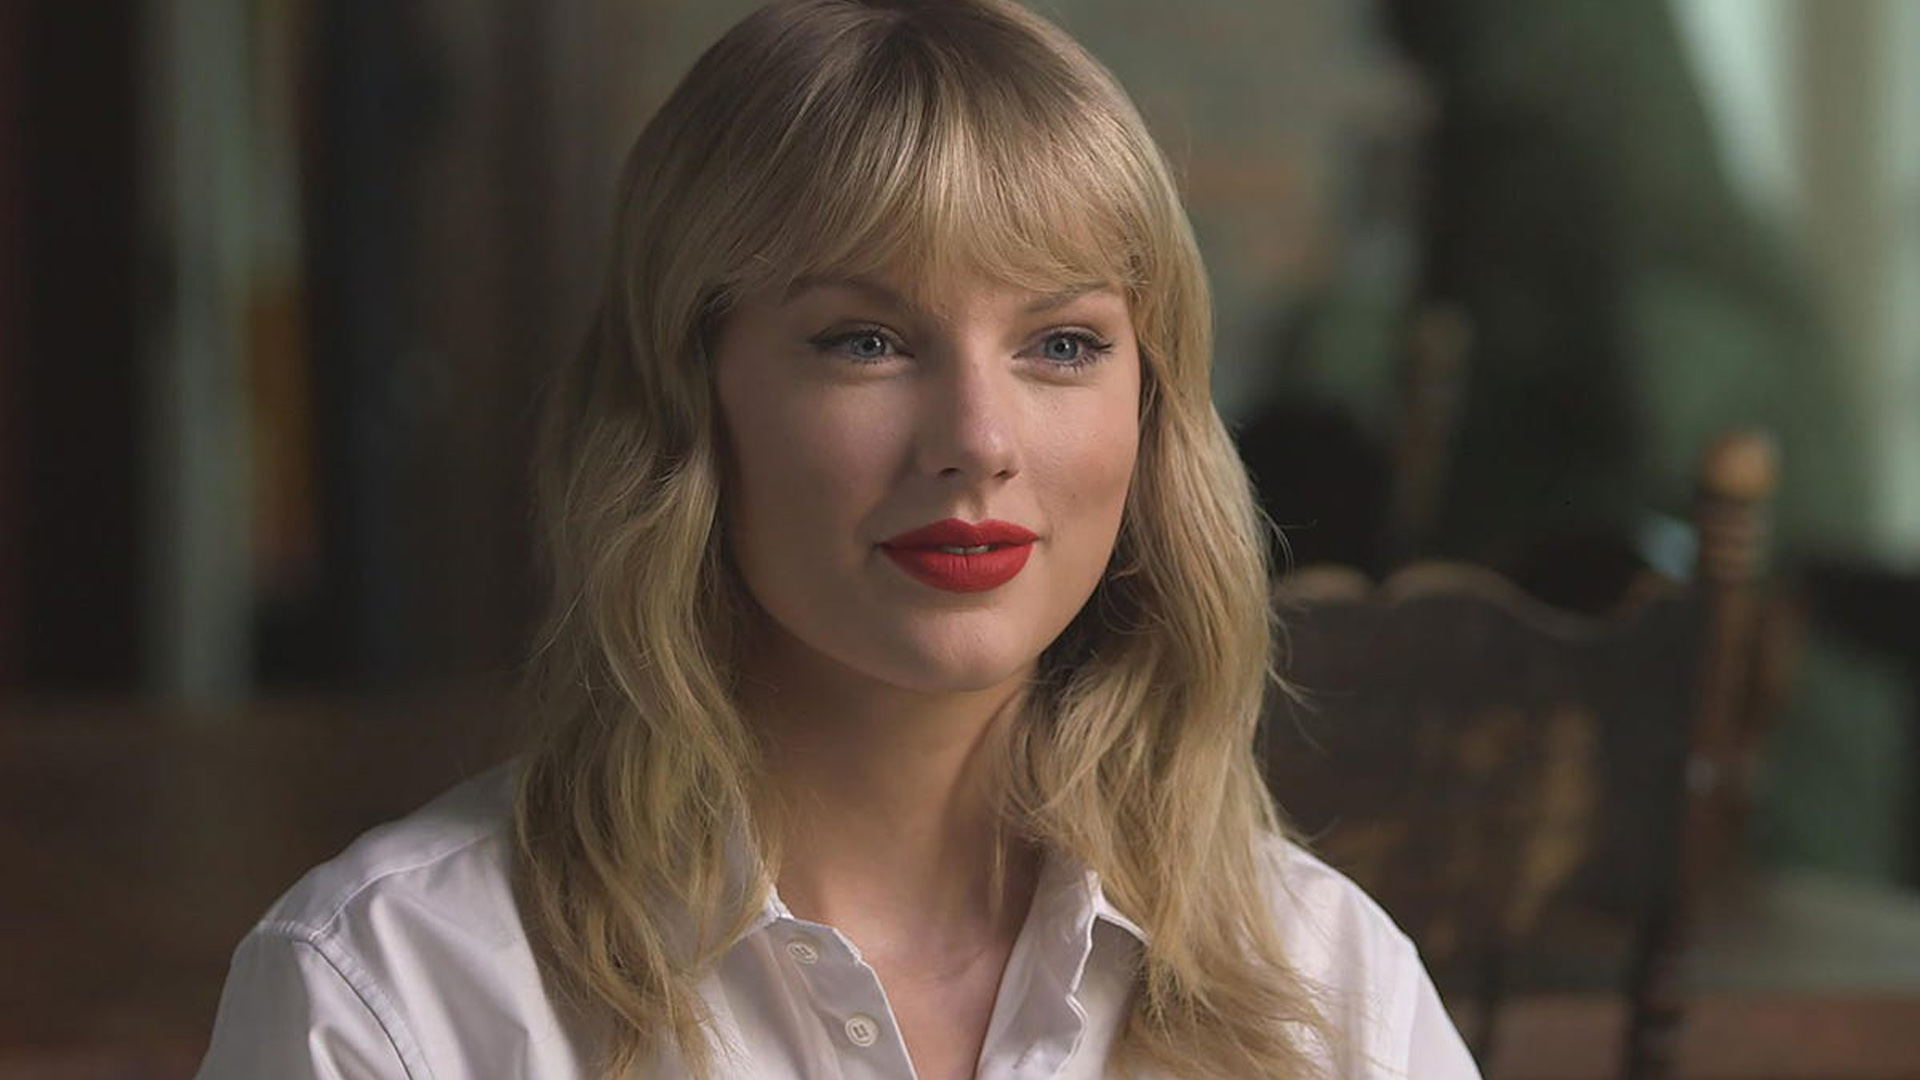 Short Hair Taylor Swift Is Wearing White Dress And Red Lipstick HD Taylor Swift